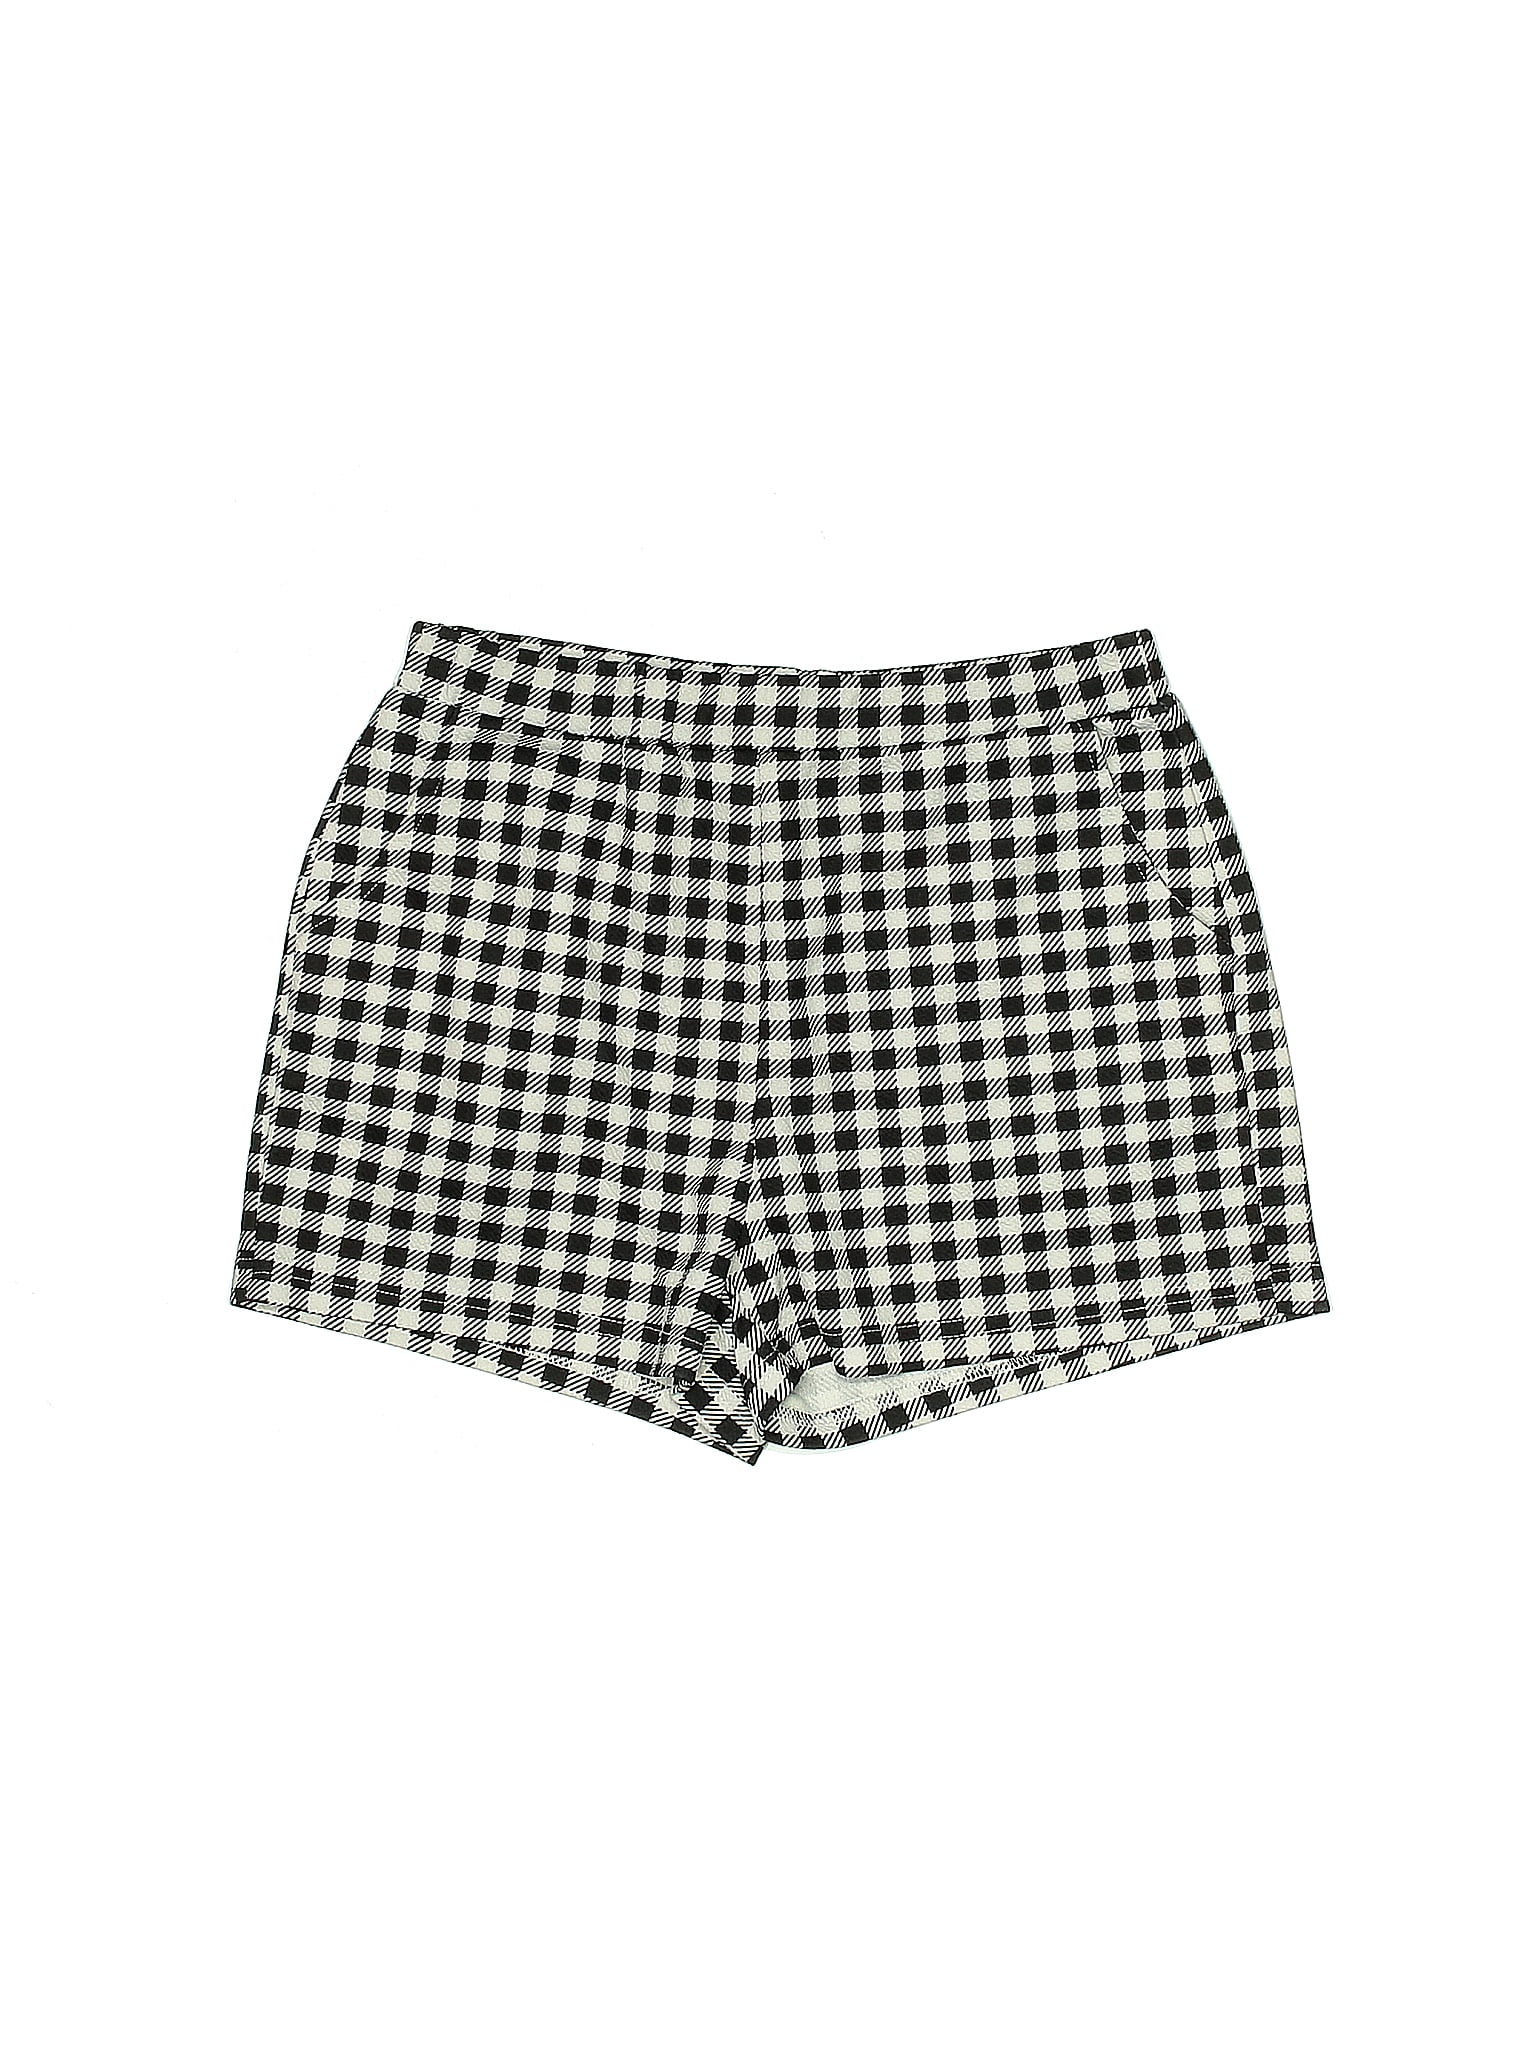 Shein Checkered-gingham Multi Color Black Shorts Size M - 50% off